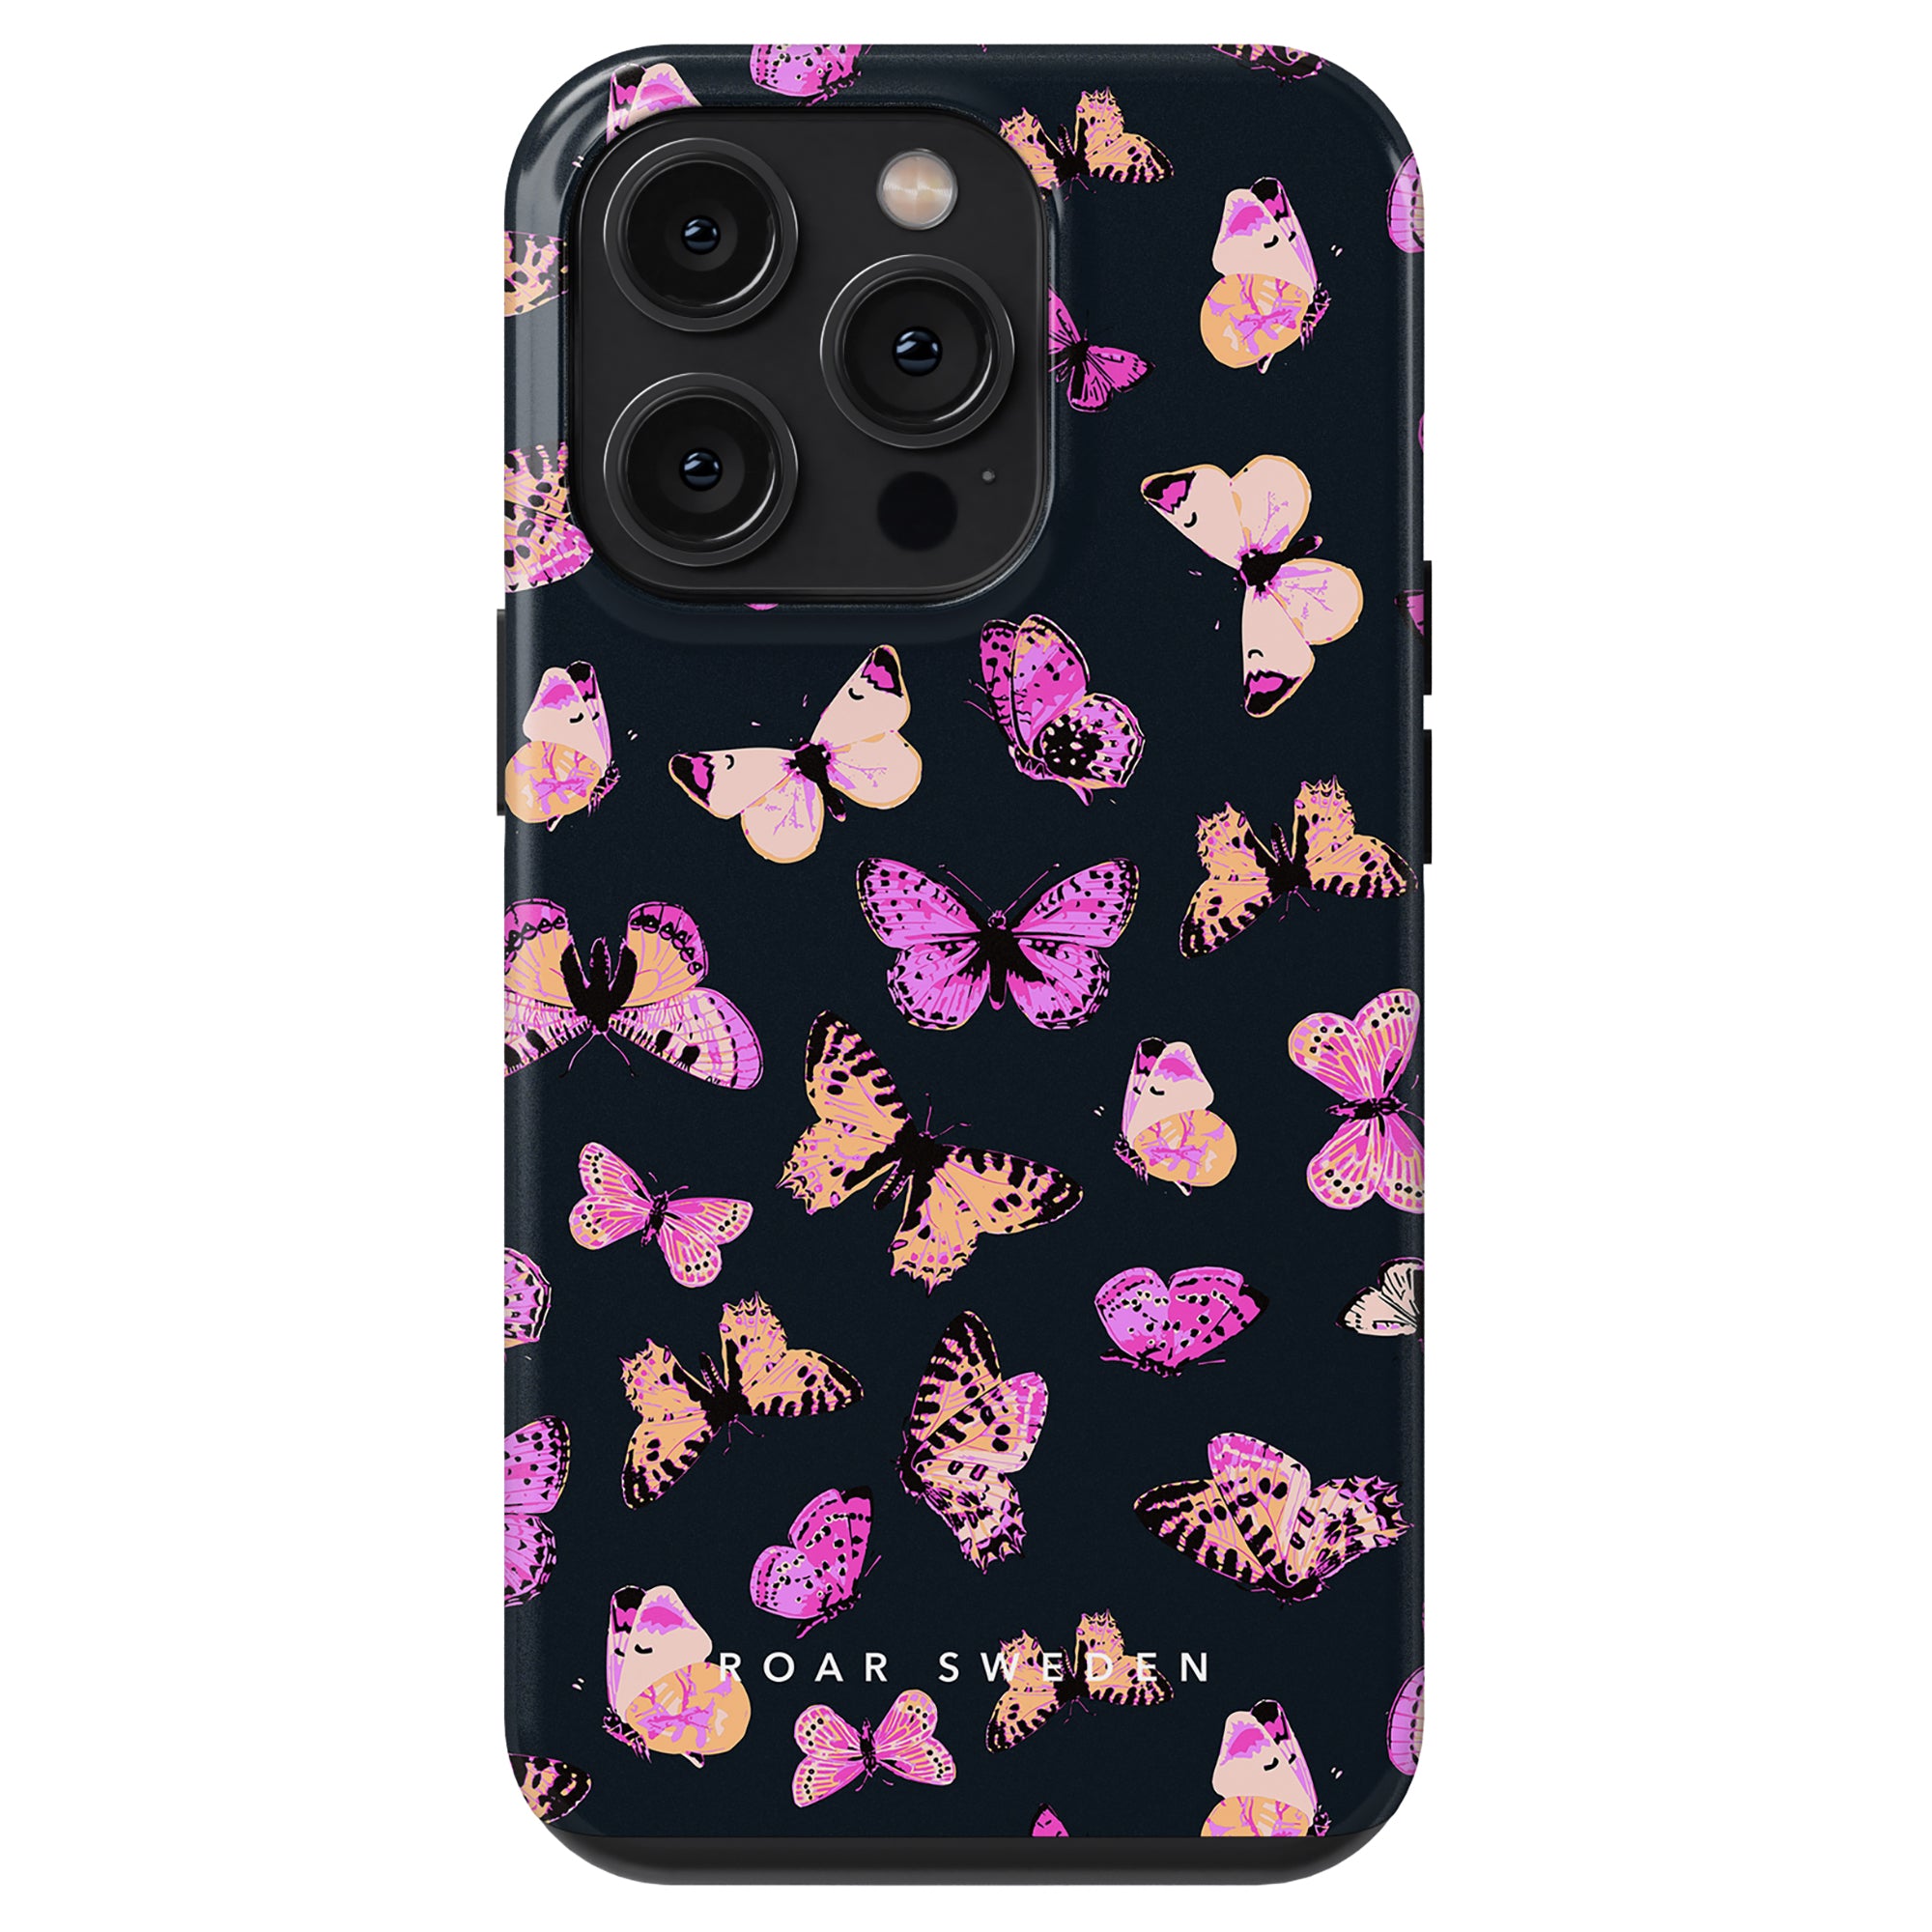 A smartphone case from the sommar collection featuring a Pink Butterflies - Tough Case design.